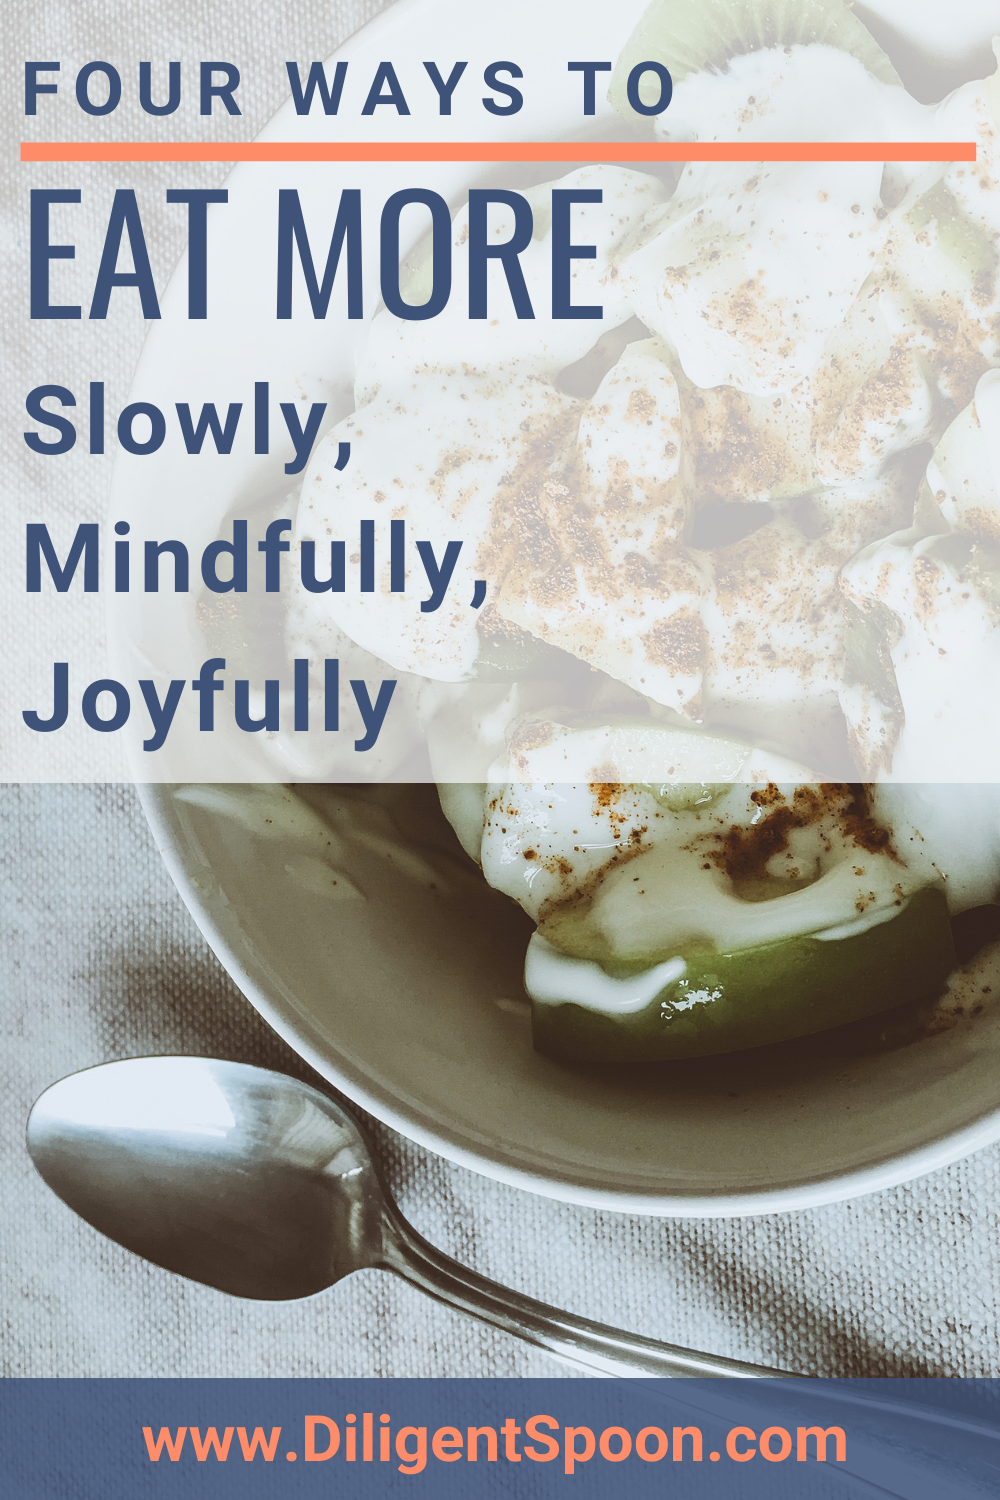 4 Ways To Eat More Mindfully